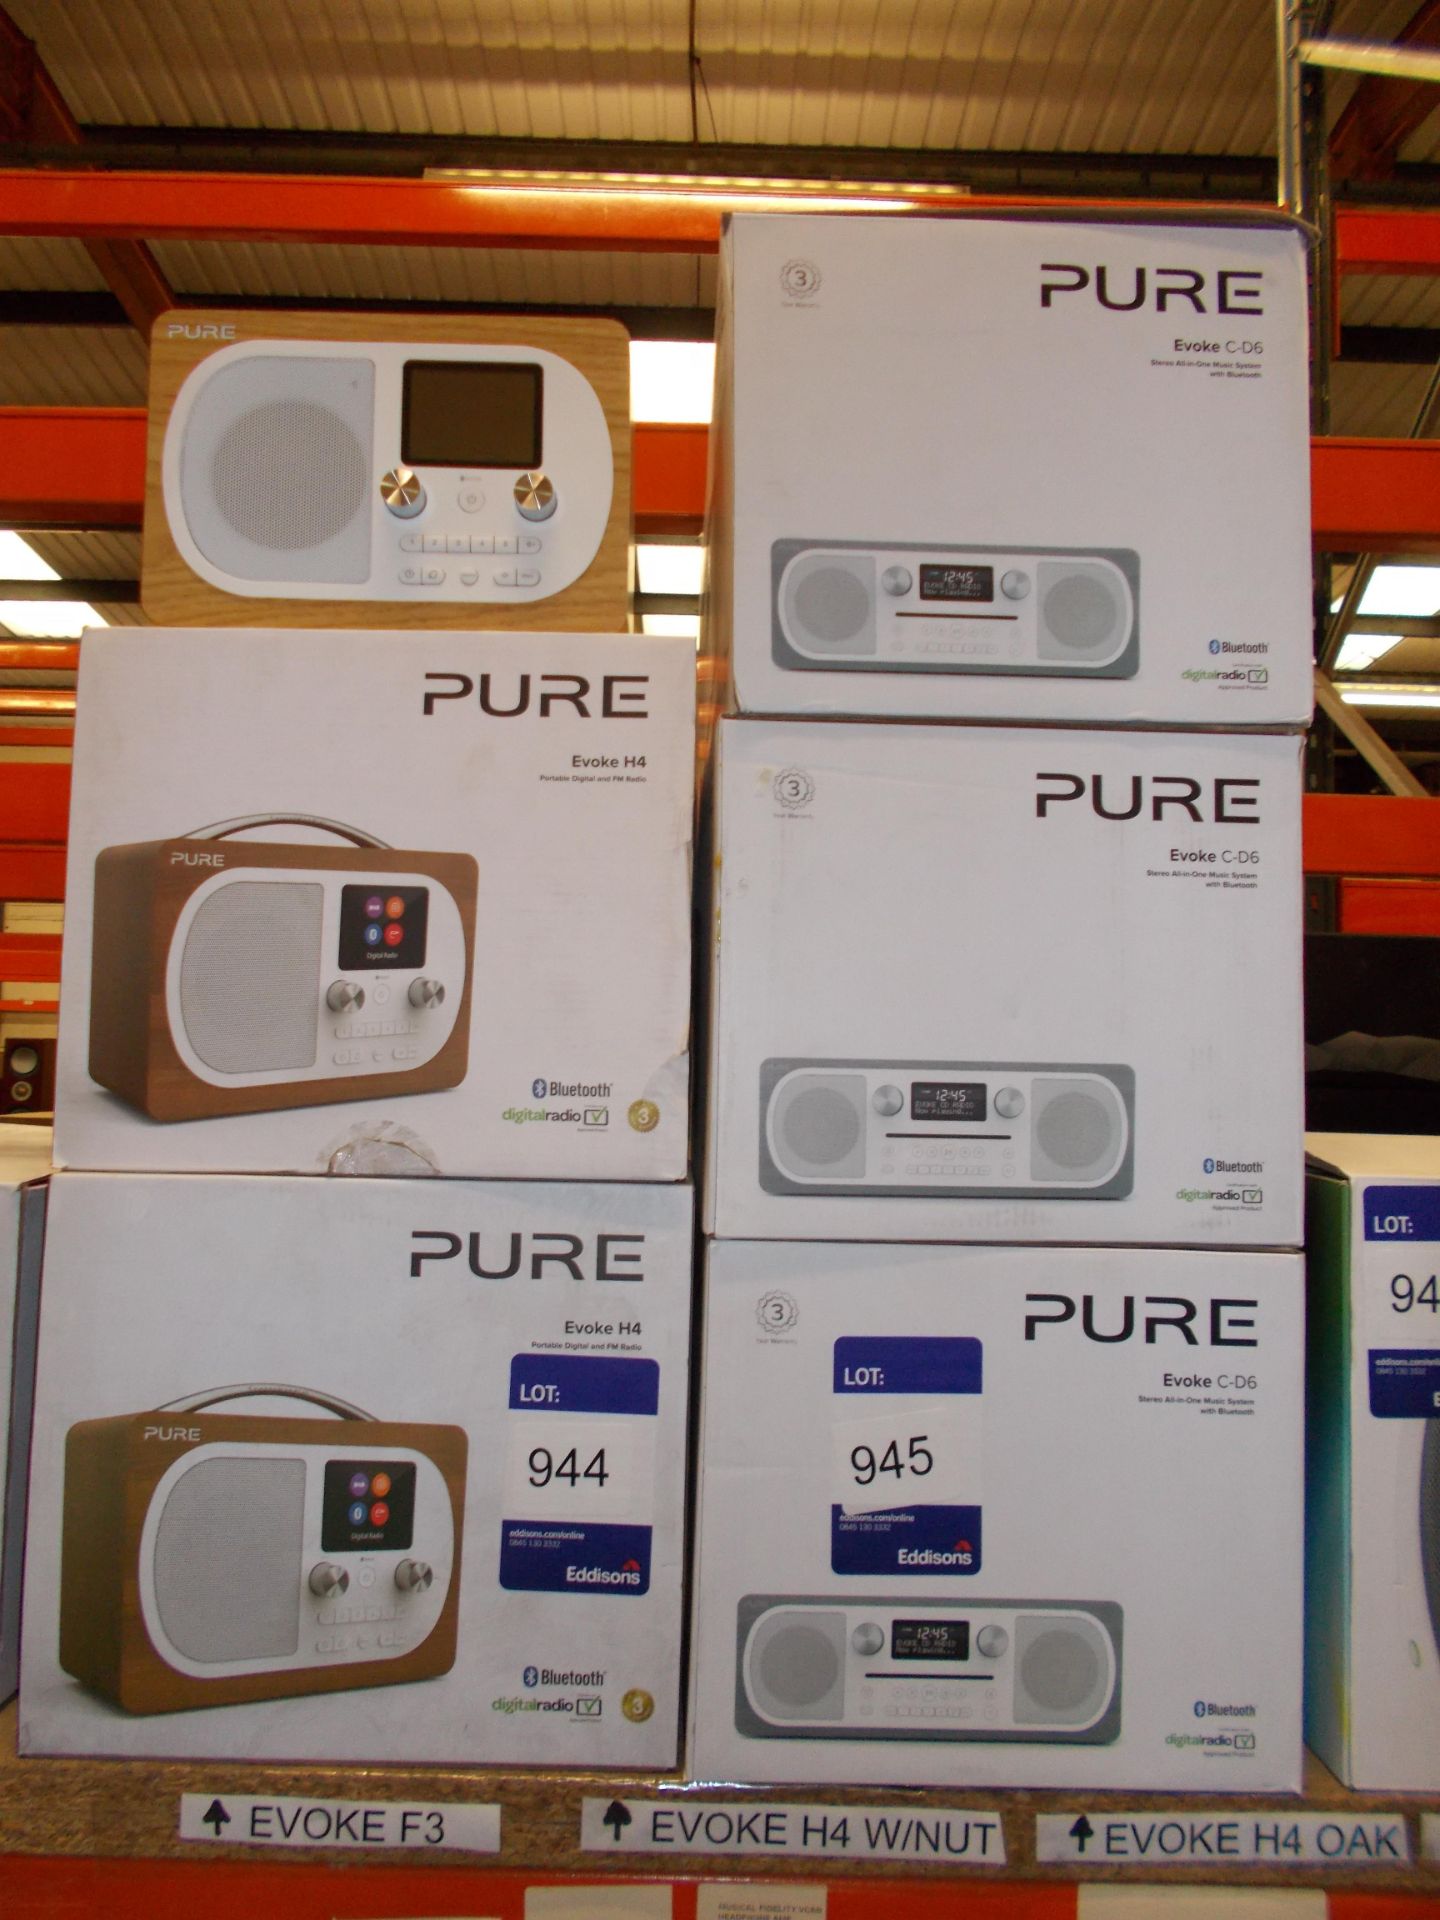 3x Pure Evoque CD6 Stereo All in One Music System with Blue Tooth (boxed) – RRP £250 each